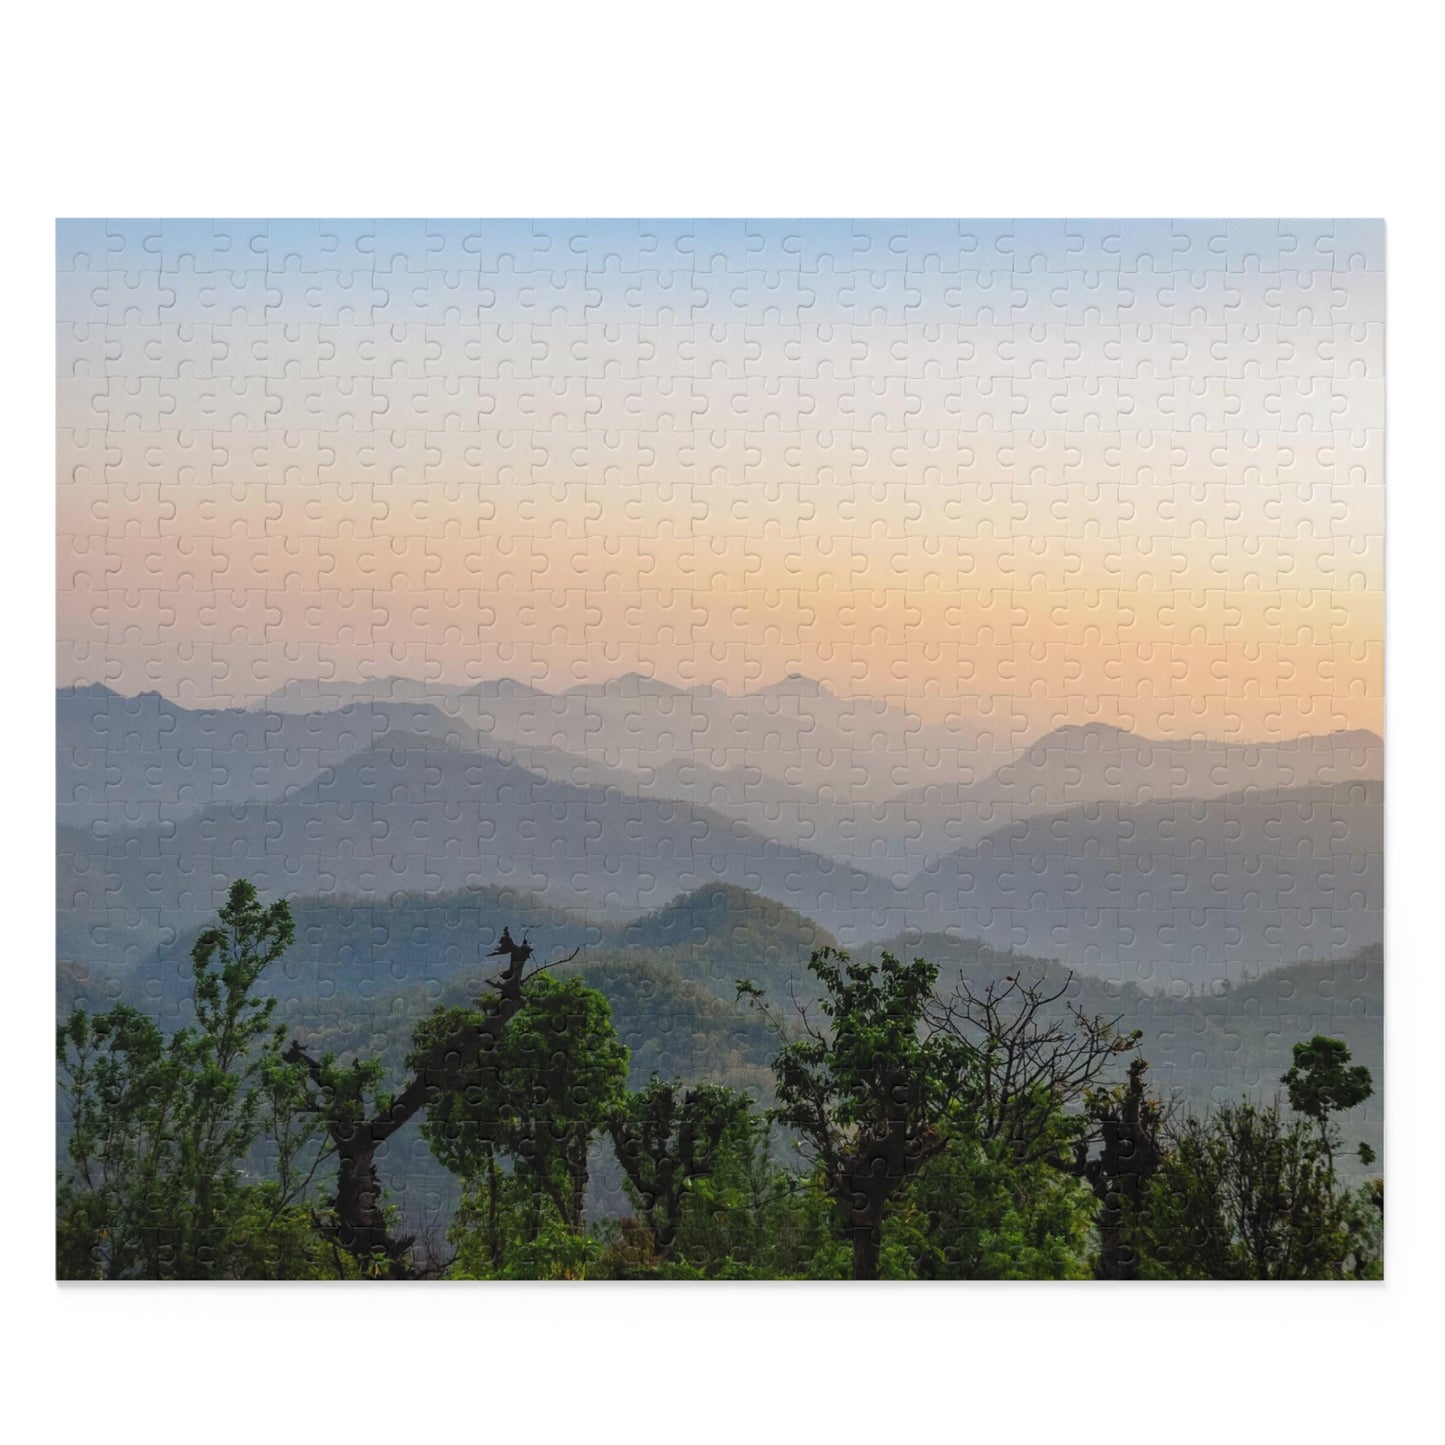 500 Piece Puzzle - Sunset in the Himalayas, Nepal - Leah Ramuglia Photography